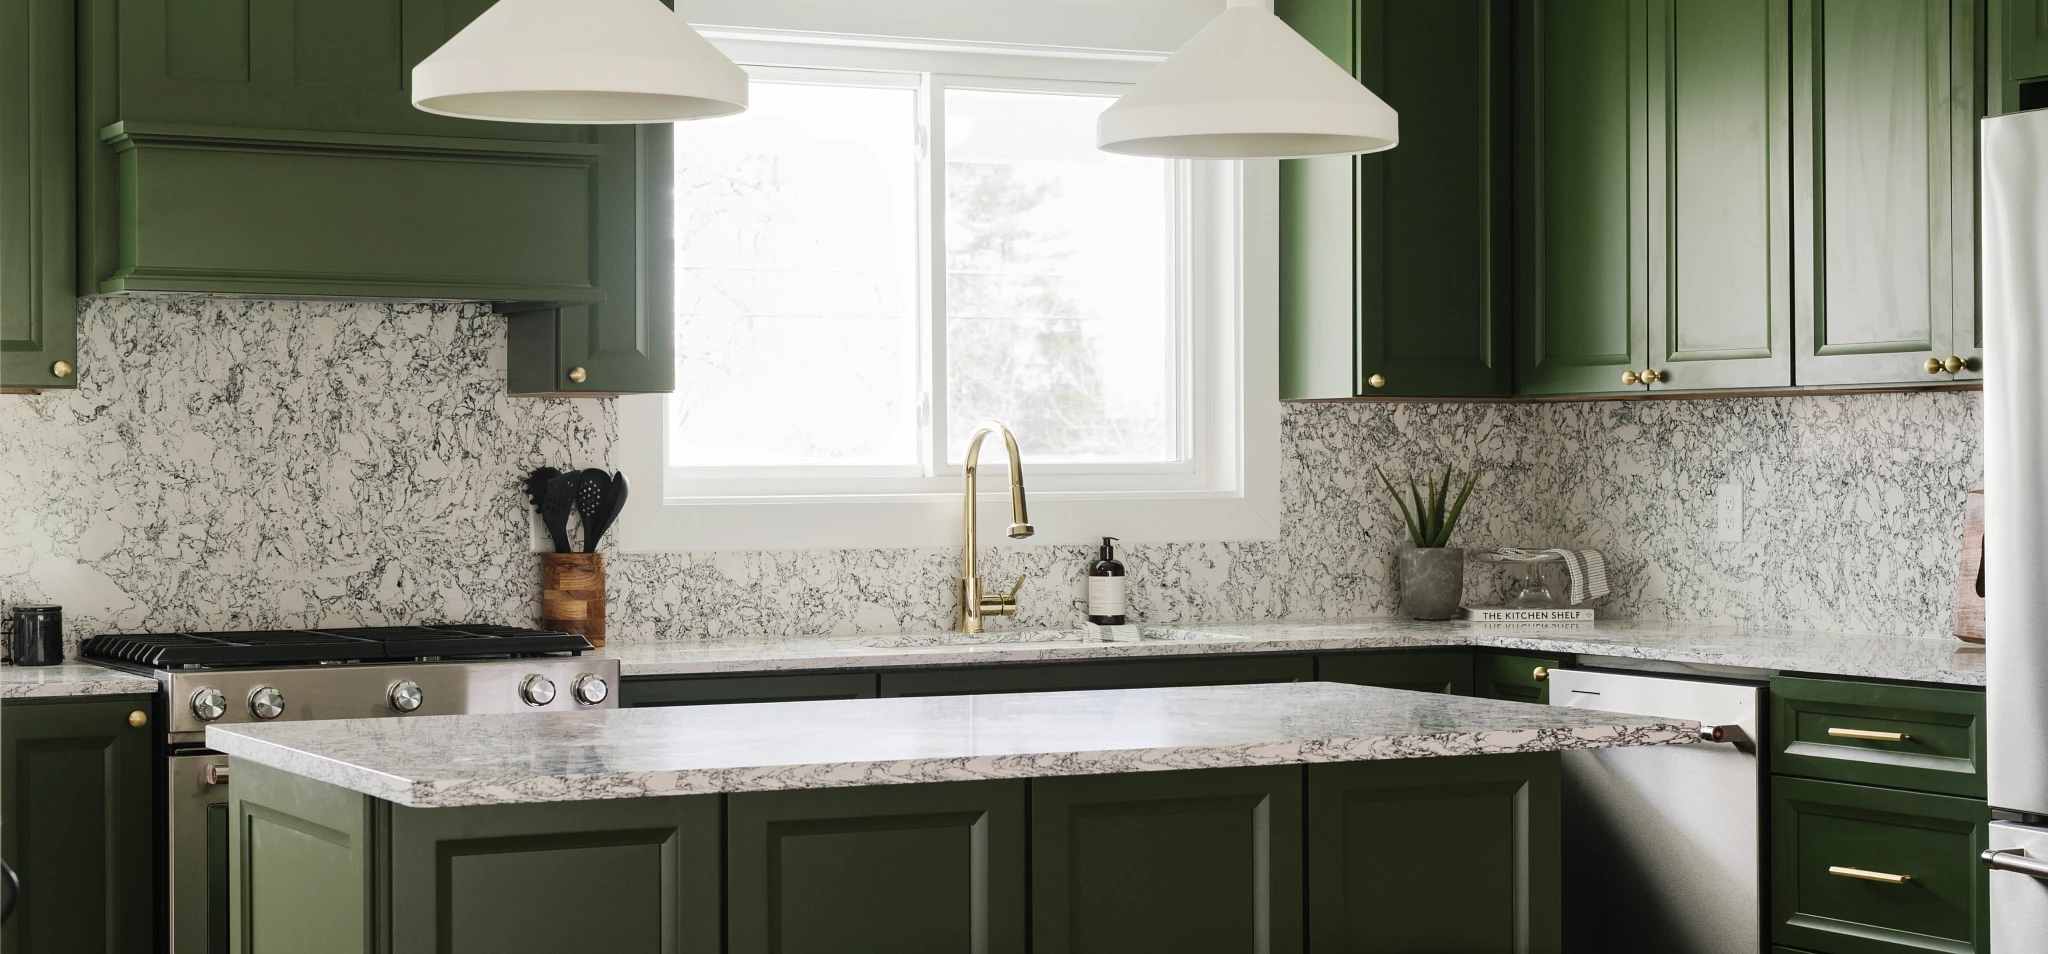 Our Favorite Green Kitchen Designs For Your Home - Cambria® Quartz Surfaces